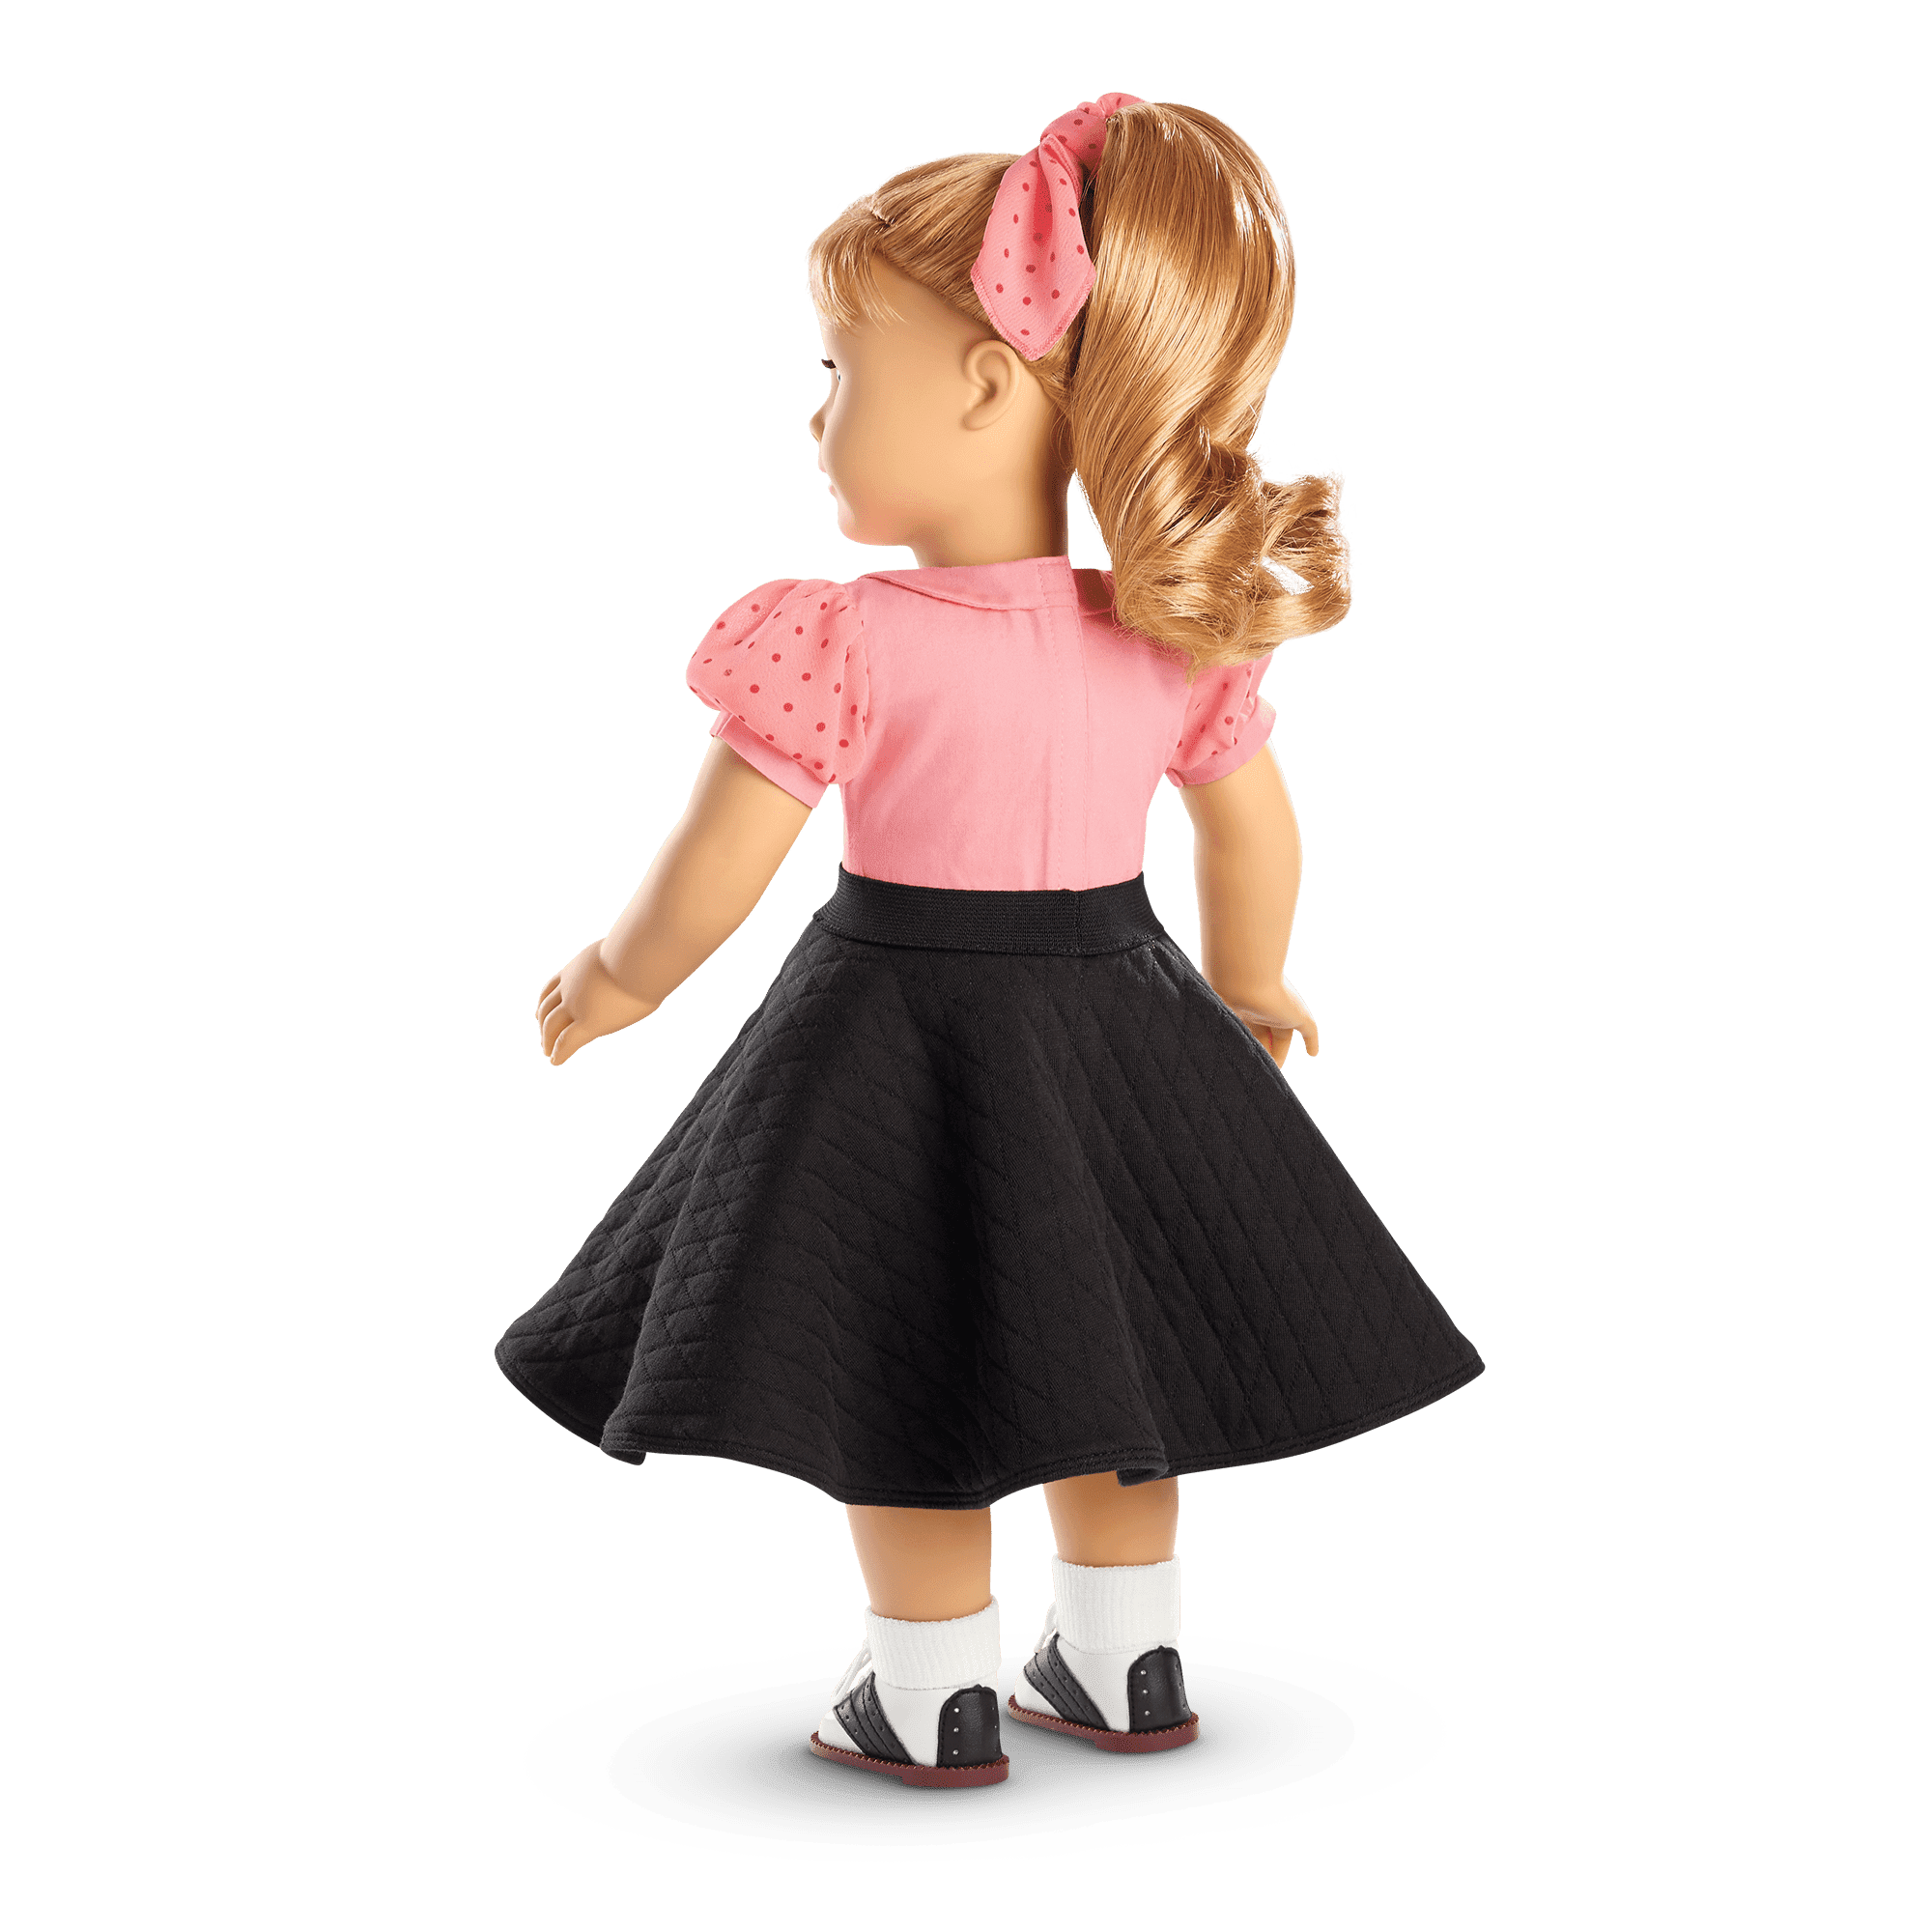 Maryellen's™ Poodle Skirt Outfit for 18-inch Dolls